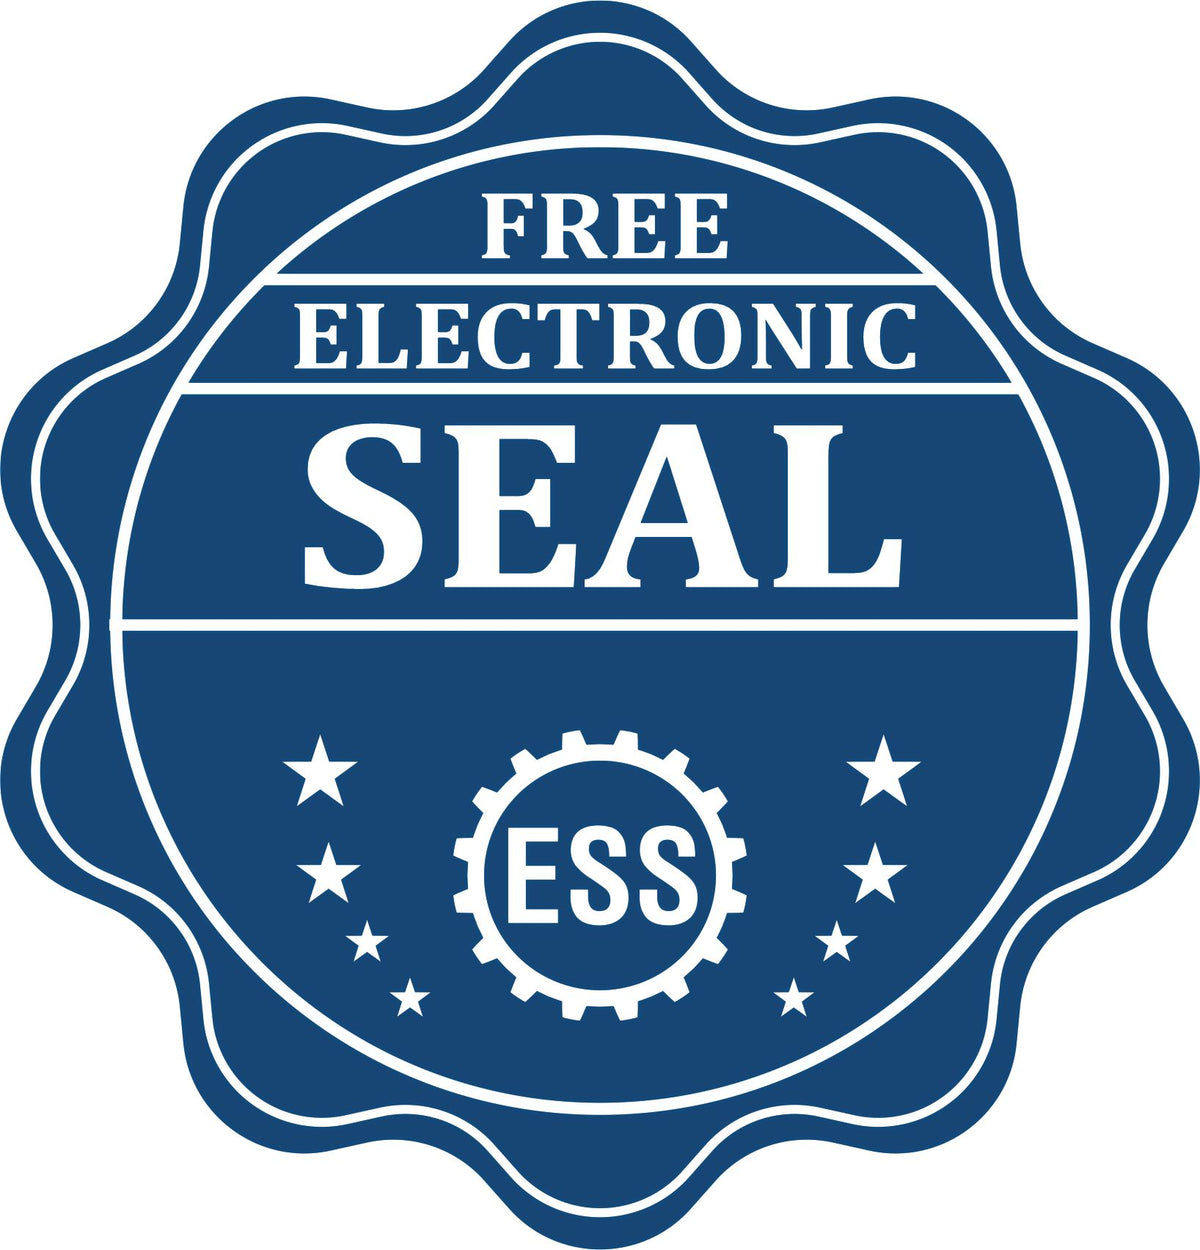 A badge showing a free electronic seal for the Gift Missouri Architect Seal with stars and the ESS gear on the emblem.